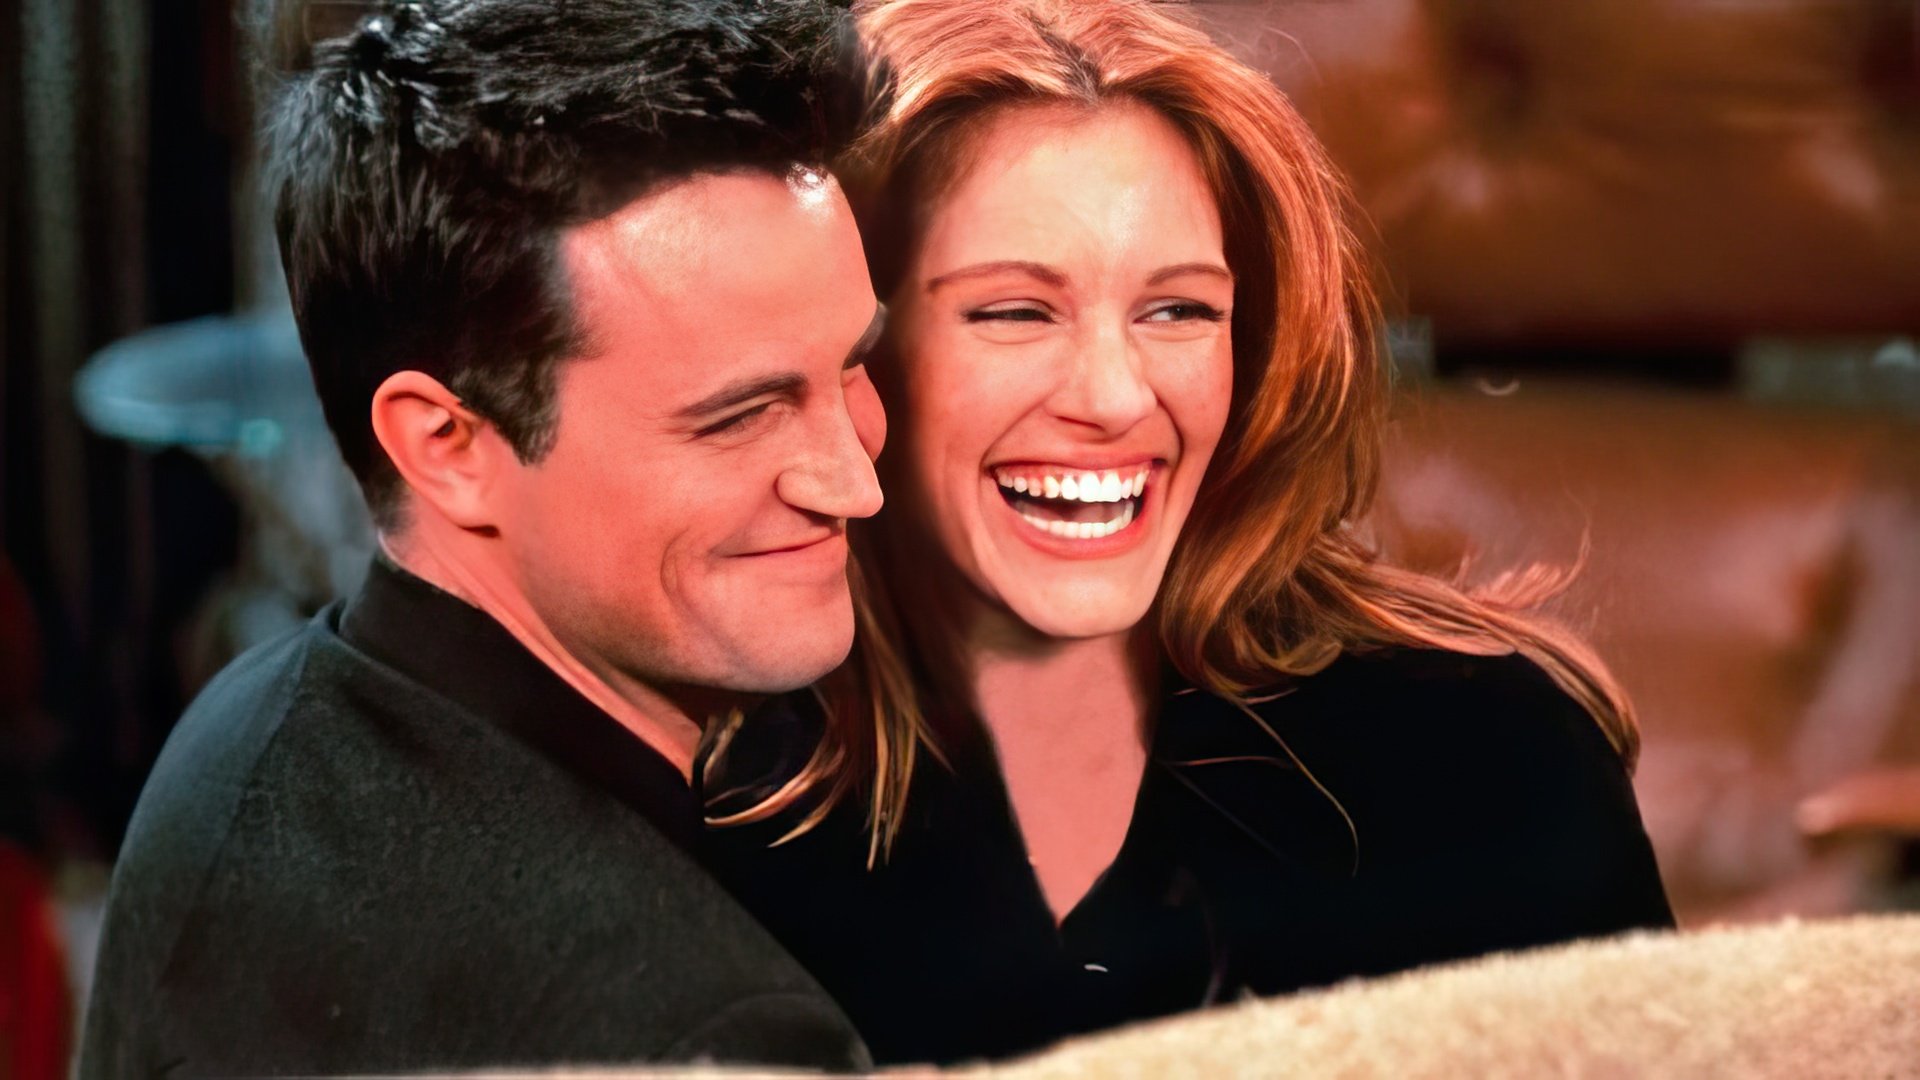 After guest-starring in an episode of Friends, Julia Roberts started an affair with Matthew Perry